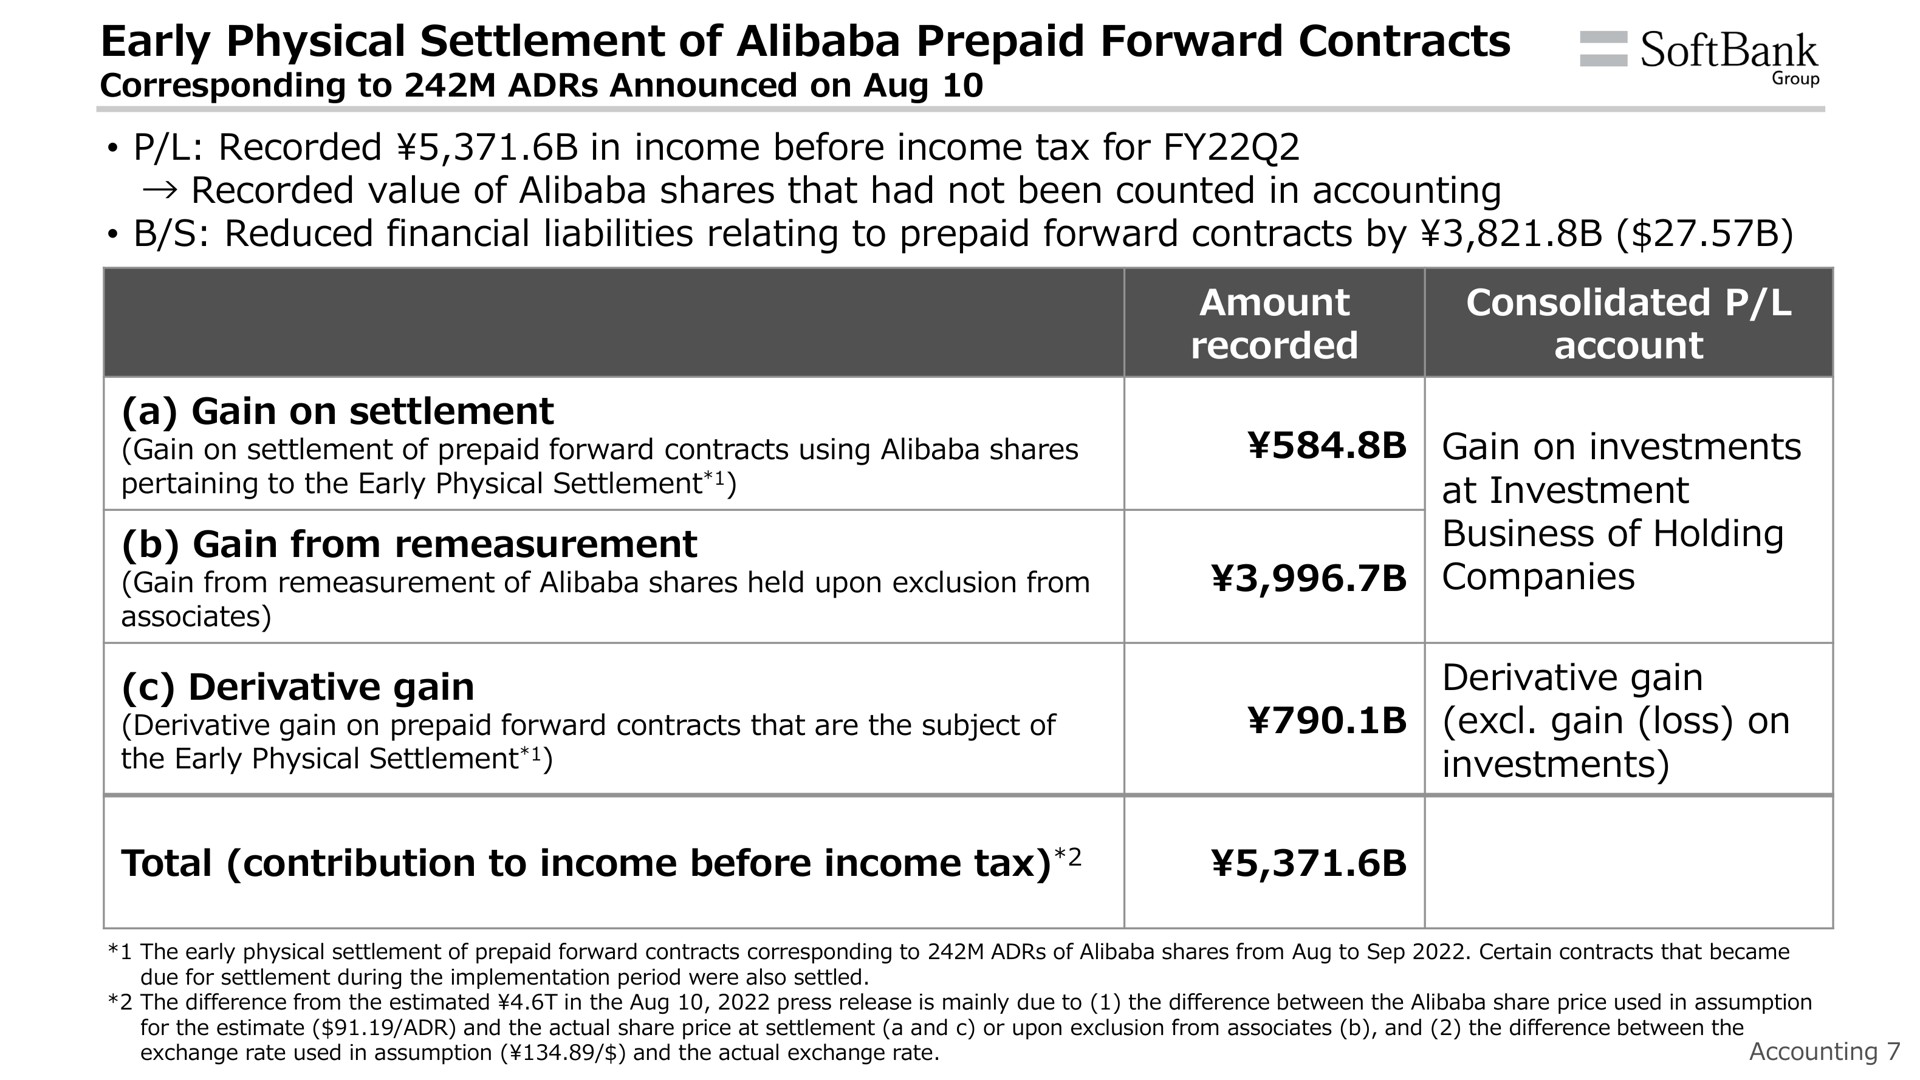 early physical settlement of prepaid forward contracts recorded in income before income tax for recorded value of shares that had not been counted in accounting reduced financial liabilities relating to prepaid forward contracts by a gain on settlement gain from remeasurement amount recorded consolidated account gain on investments at investment business of holding companies derivative gain derivative gain gain loss on investments total contribution to income before income tax | SoftBank